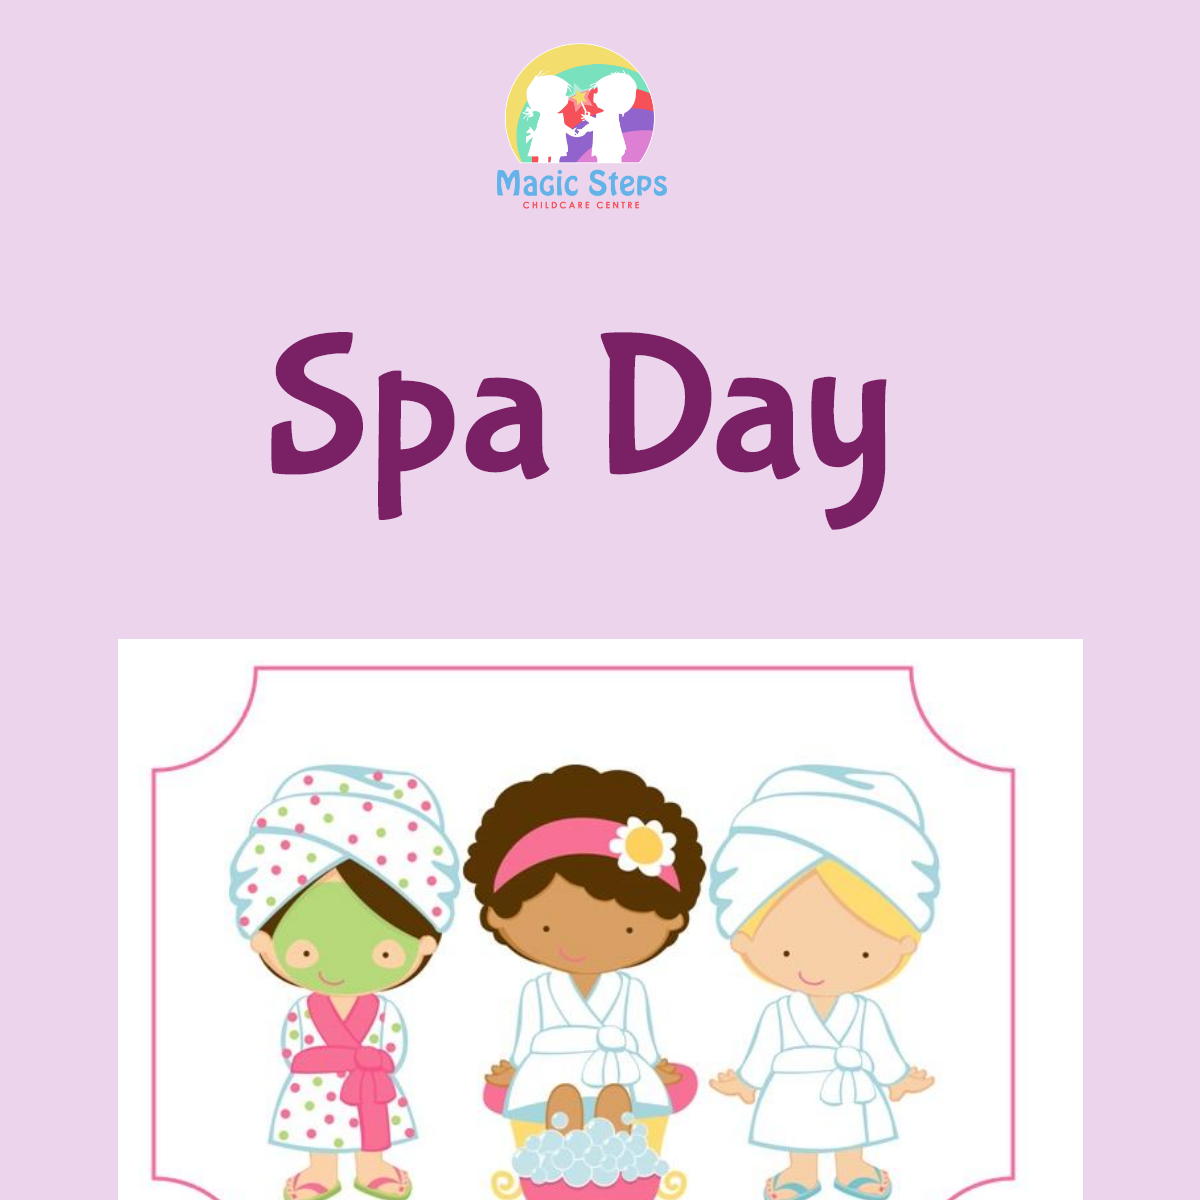 Spa Day- Tuesday 13th April